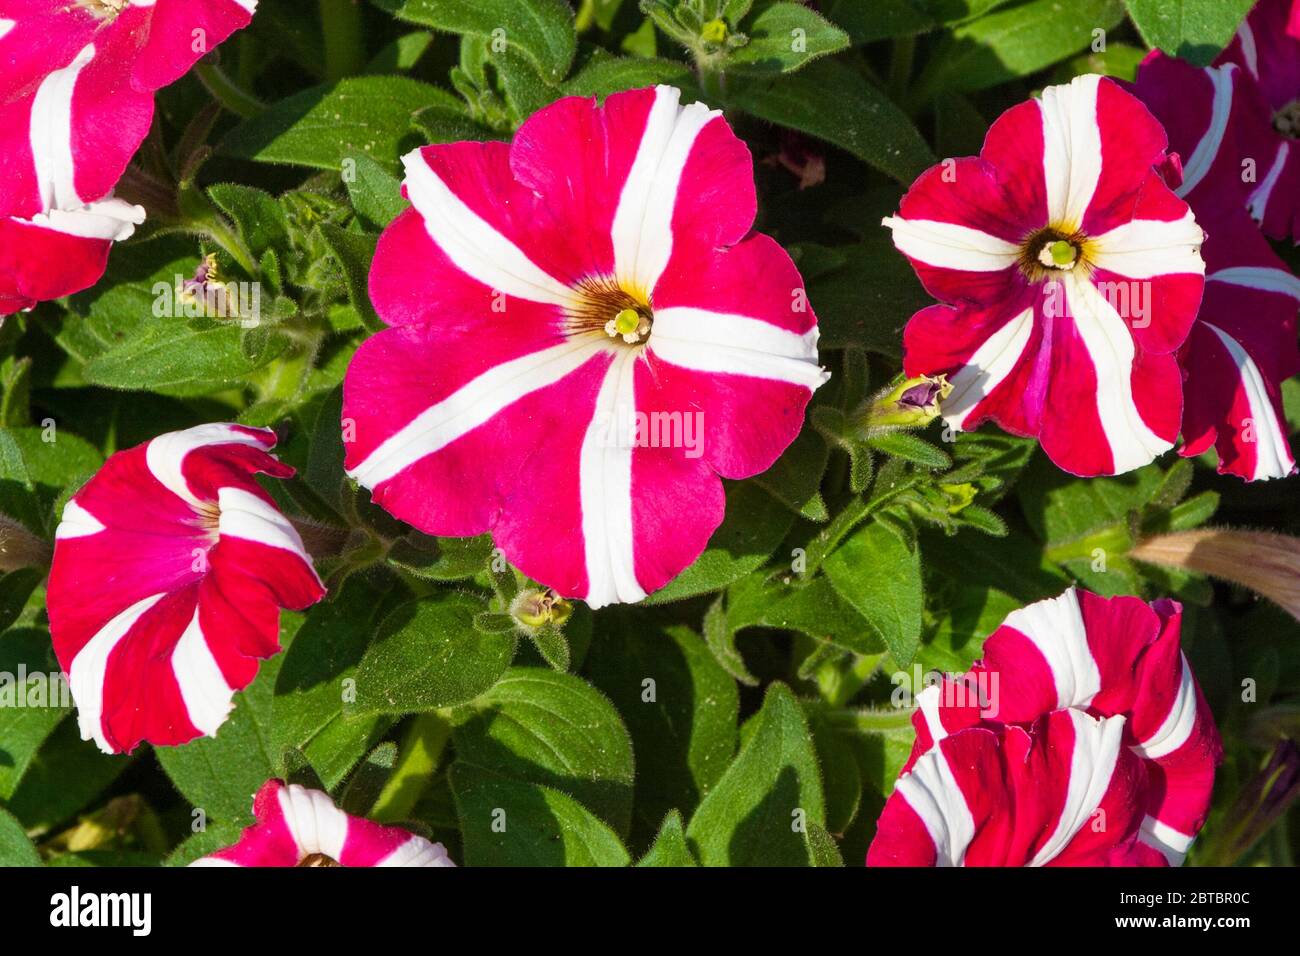 Candy-striped Petunias at Mercer Arboretum and Botanical Gardens in Spring, Texas. Stock Photo